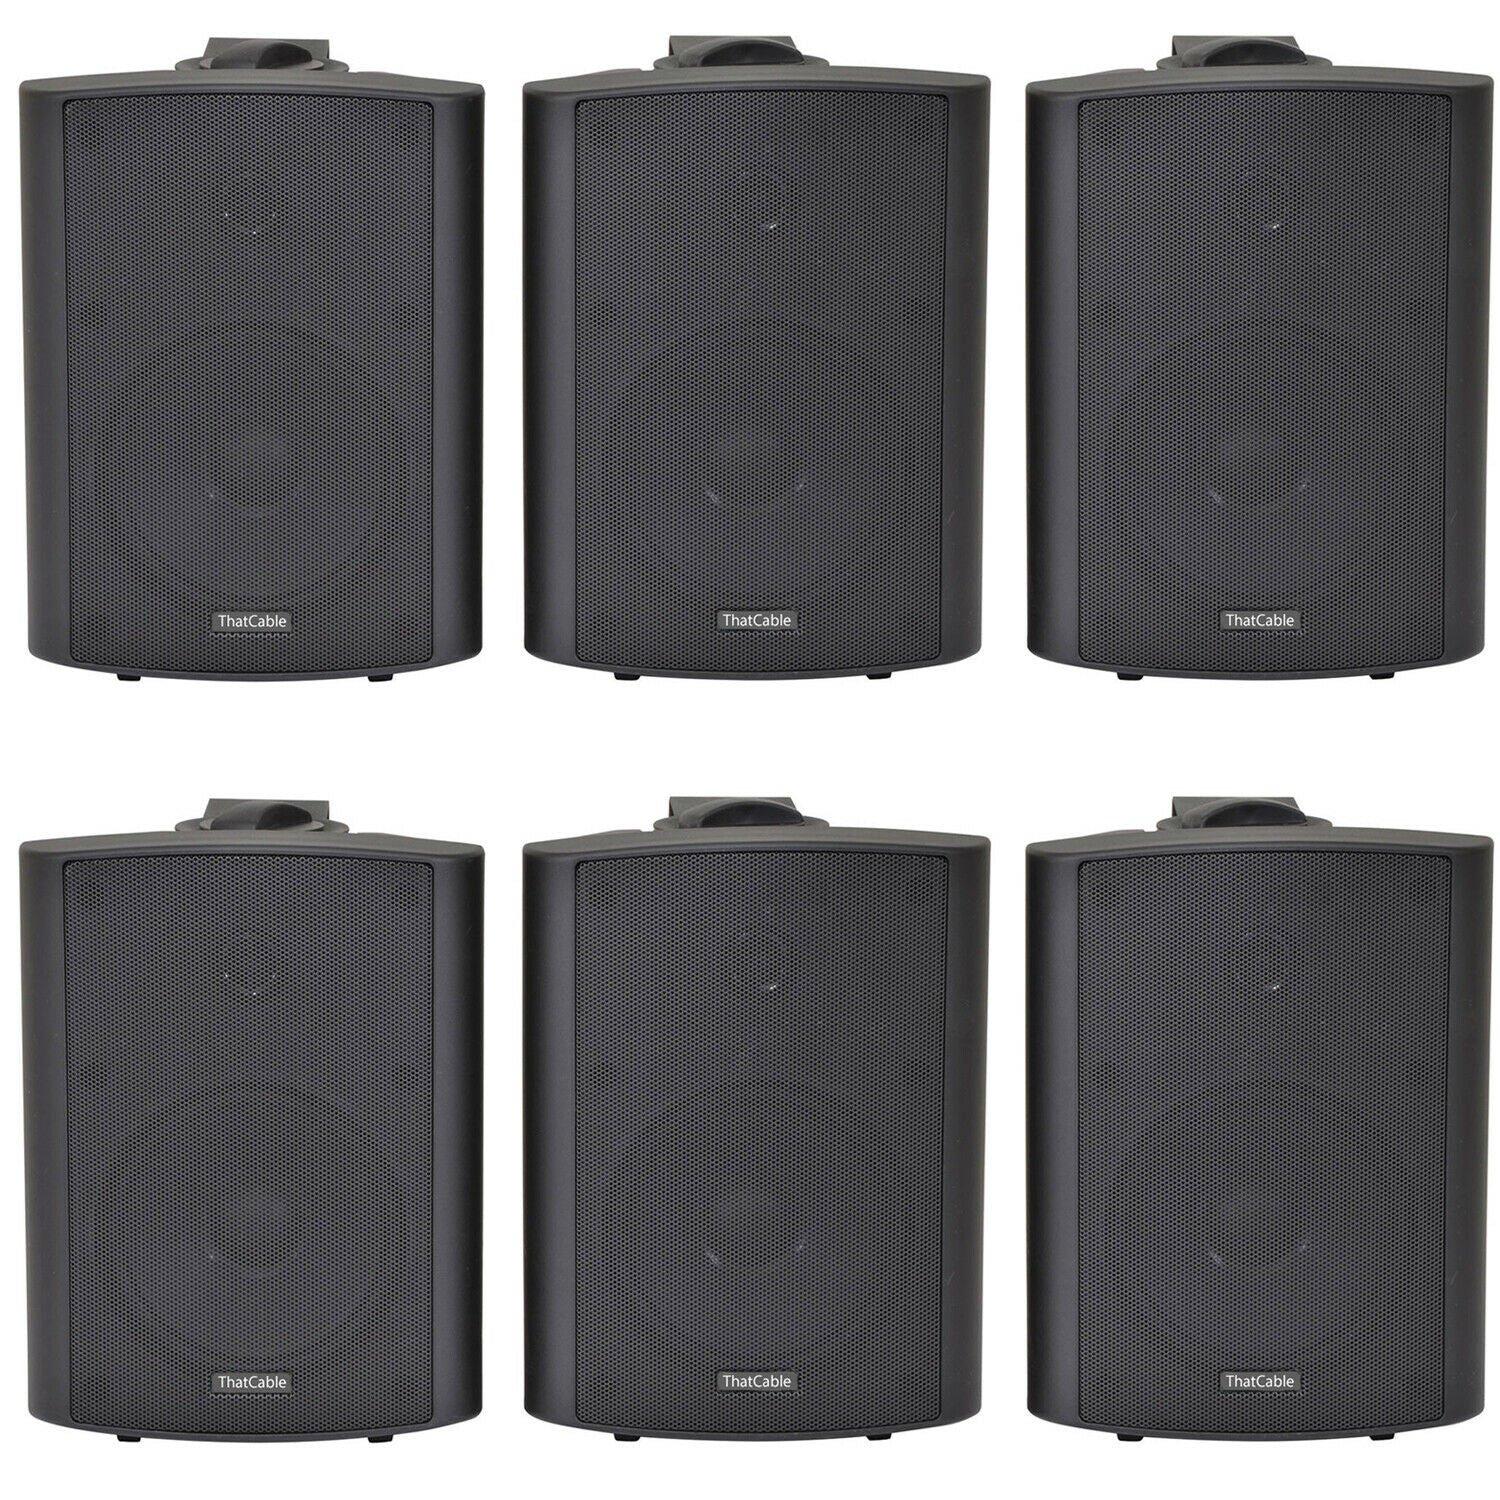 6x 90W Black Wall Mounted Stereo Speakers 5.25